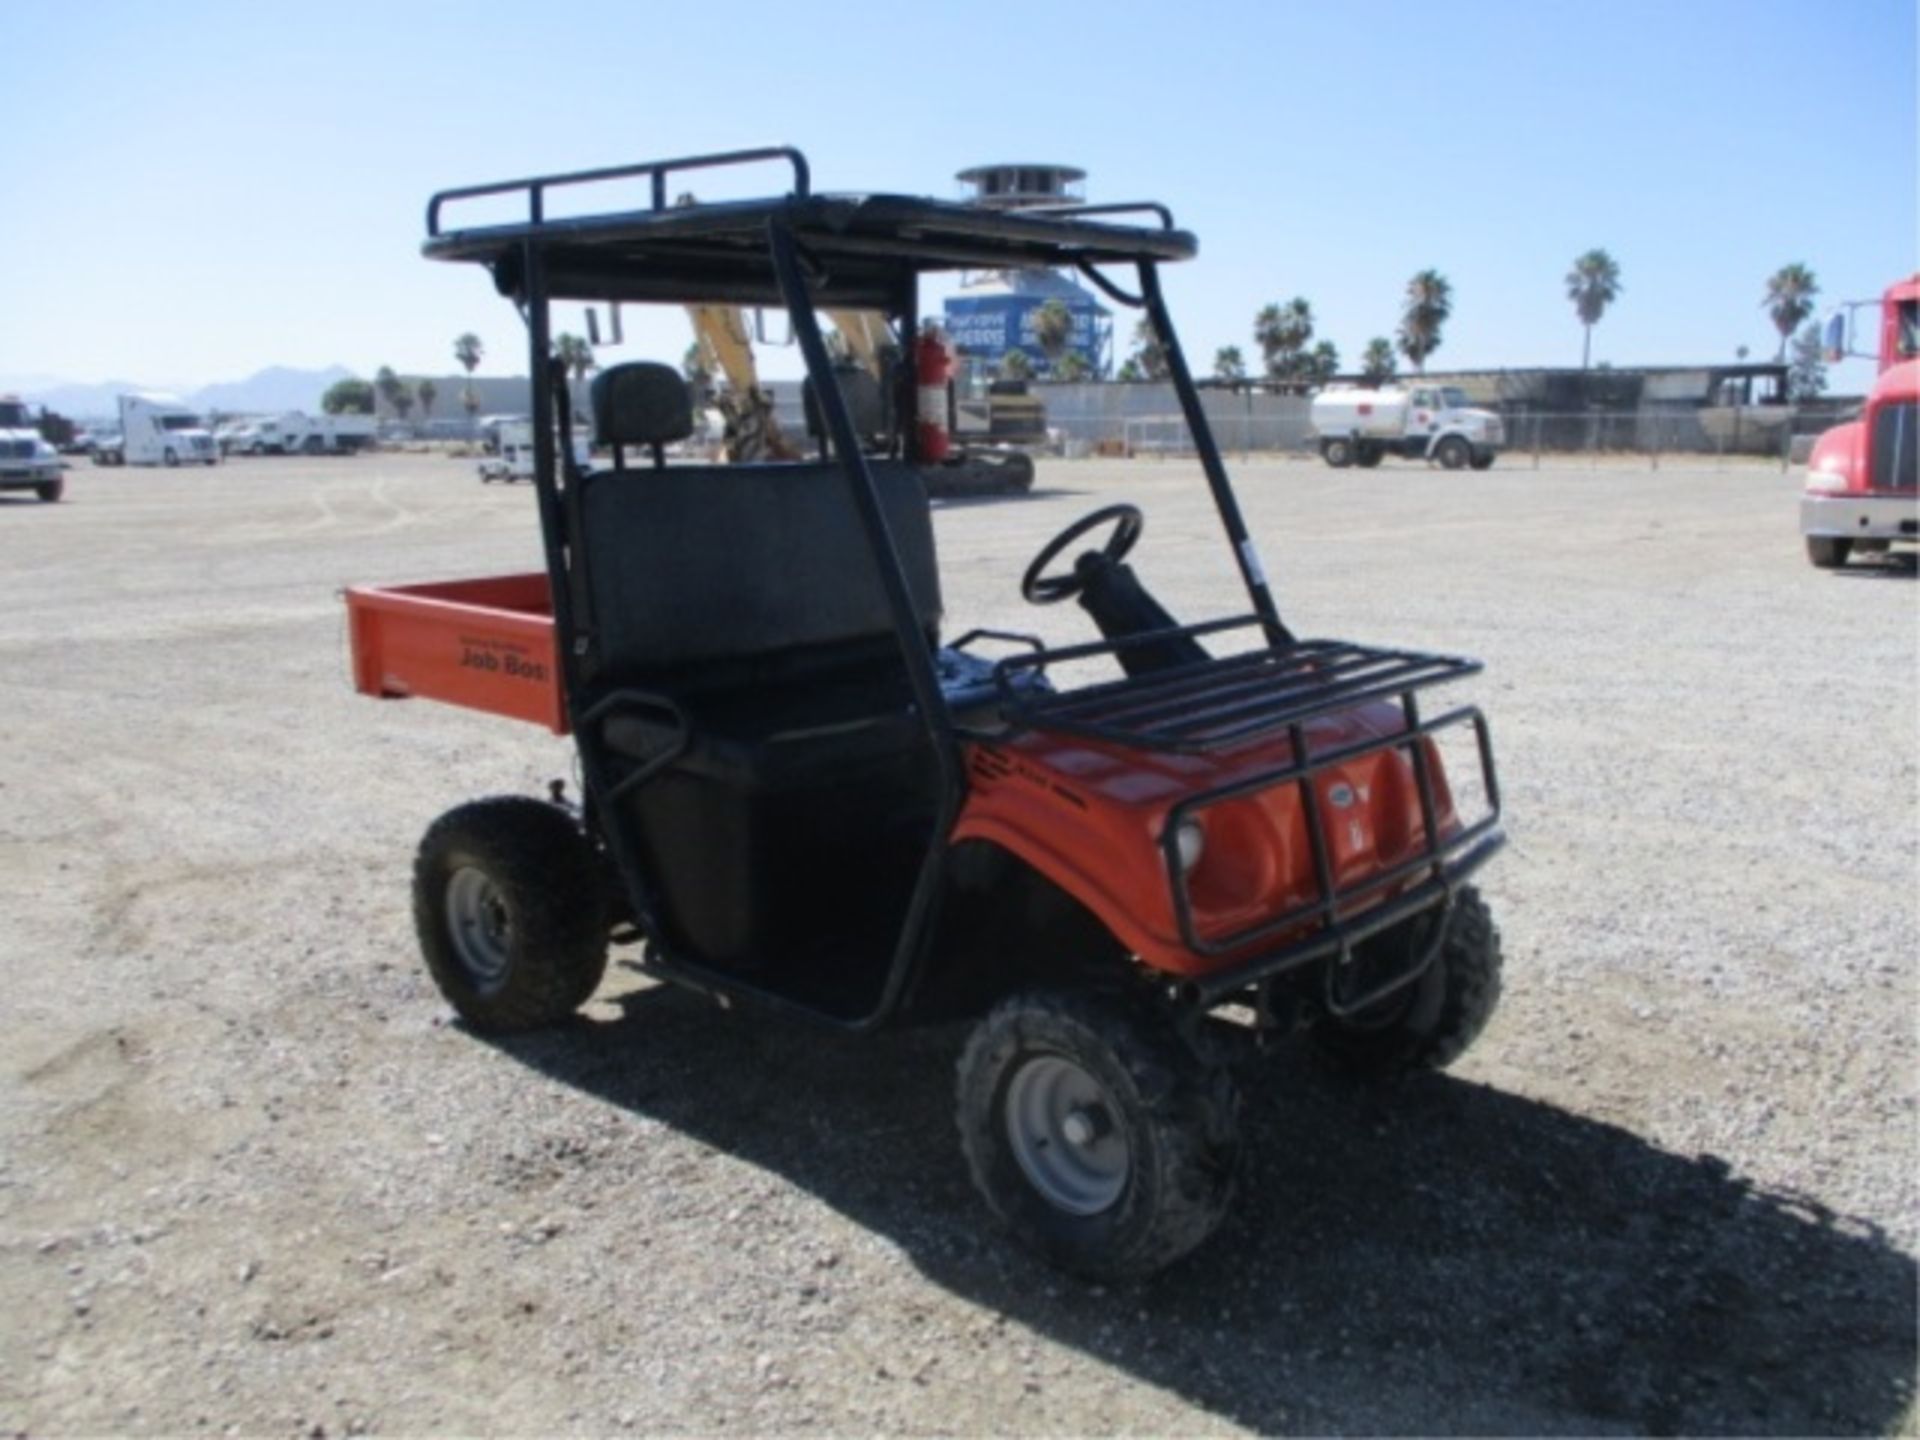 2008 American Sportworks Job Boss Utility Cart, Honda Gas, Rear Metal Dump Bed, Canopy, Tow Hitch, - Image 9 of 50